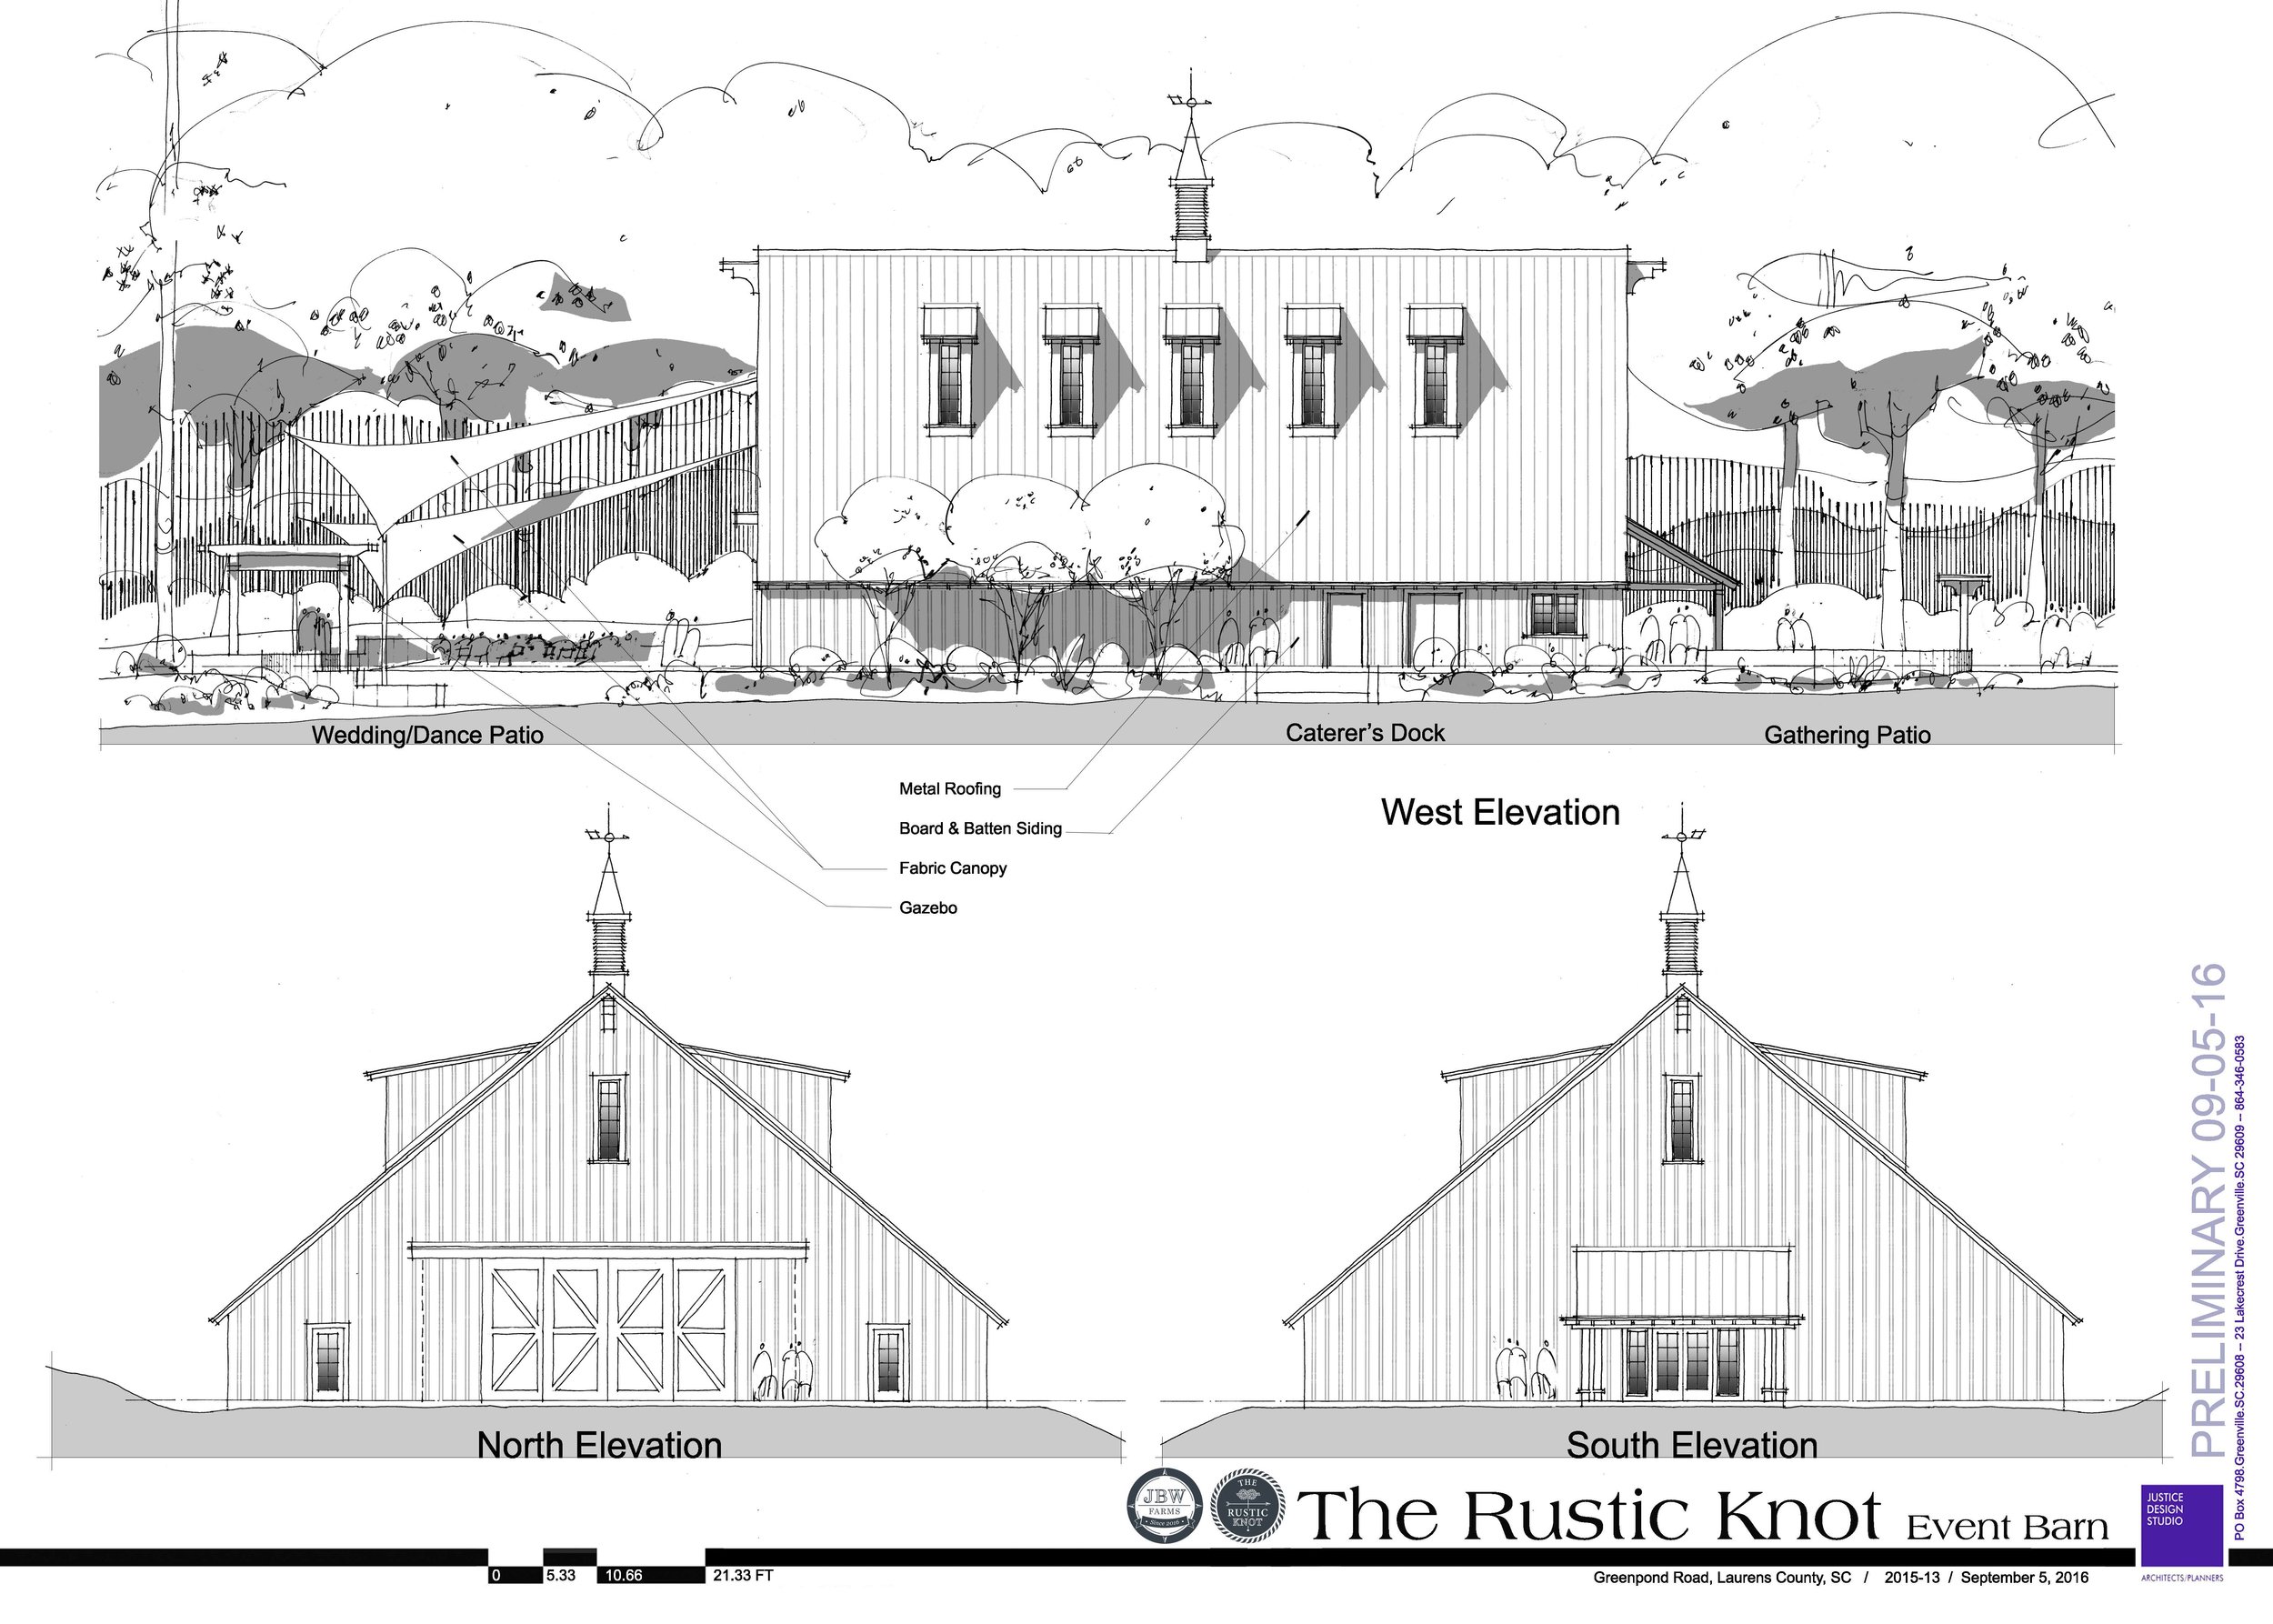 THE RUSTIC KNOT